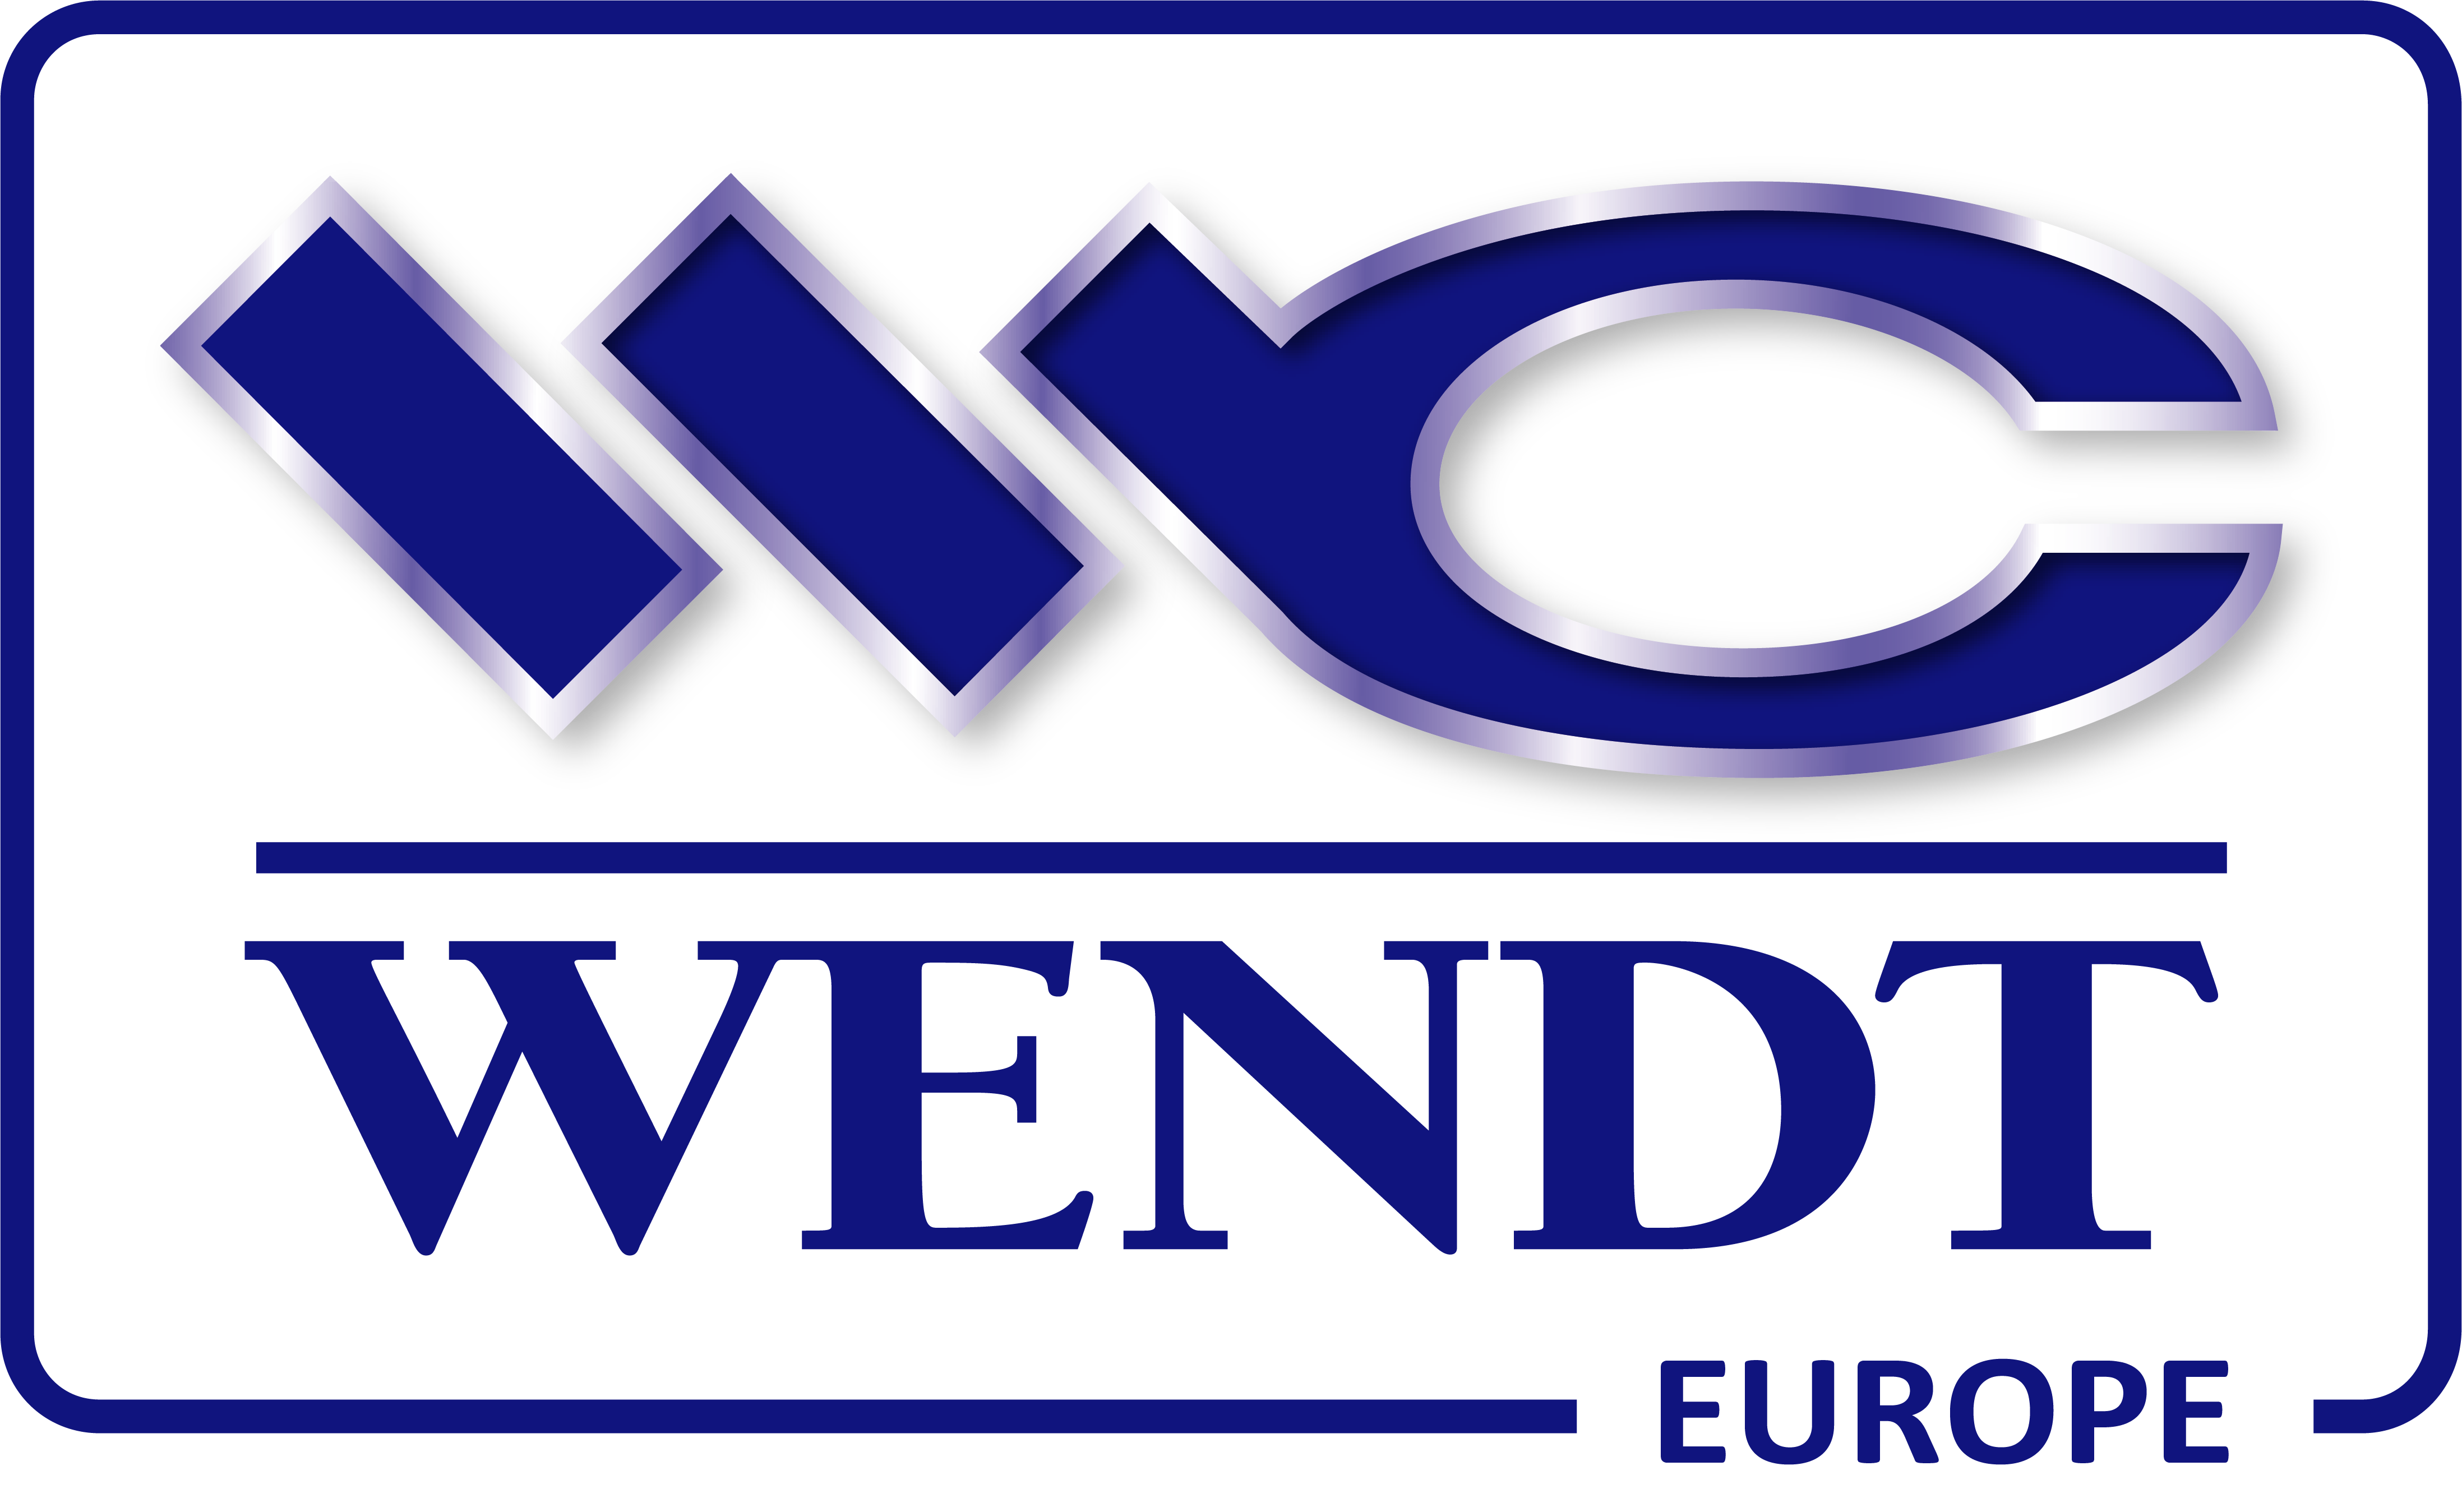 Wendt Corp Europe